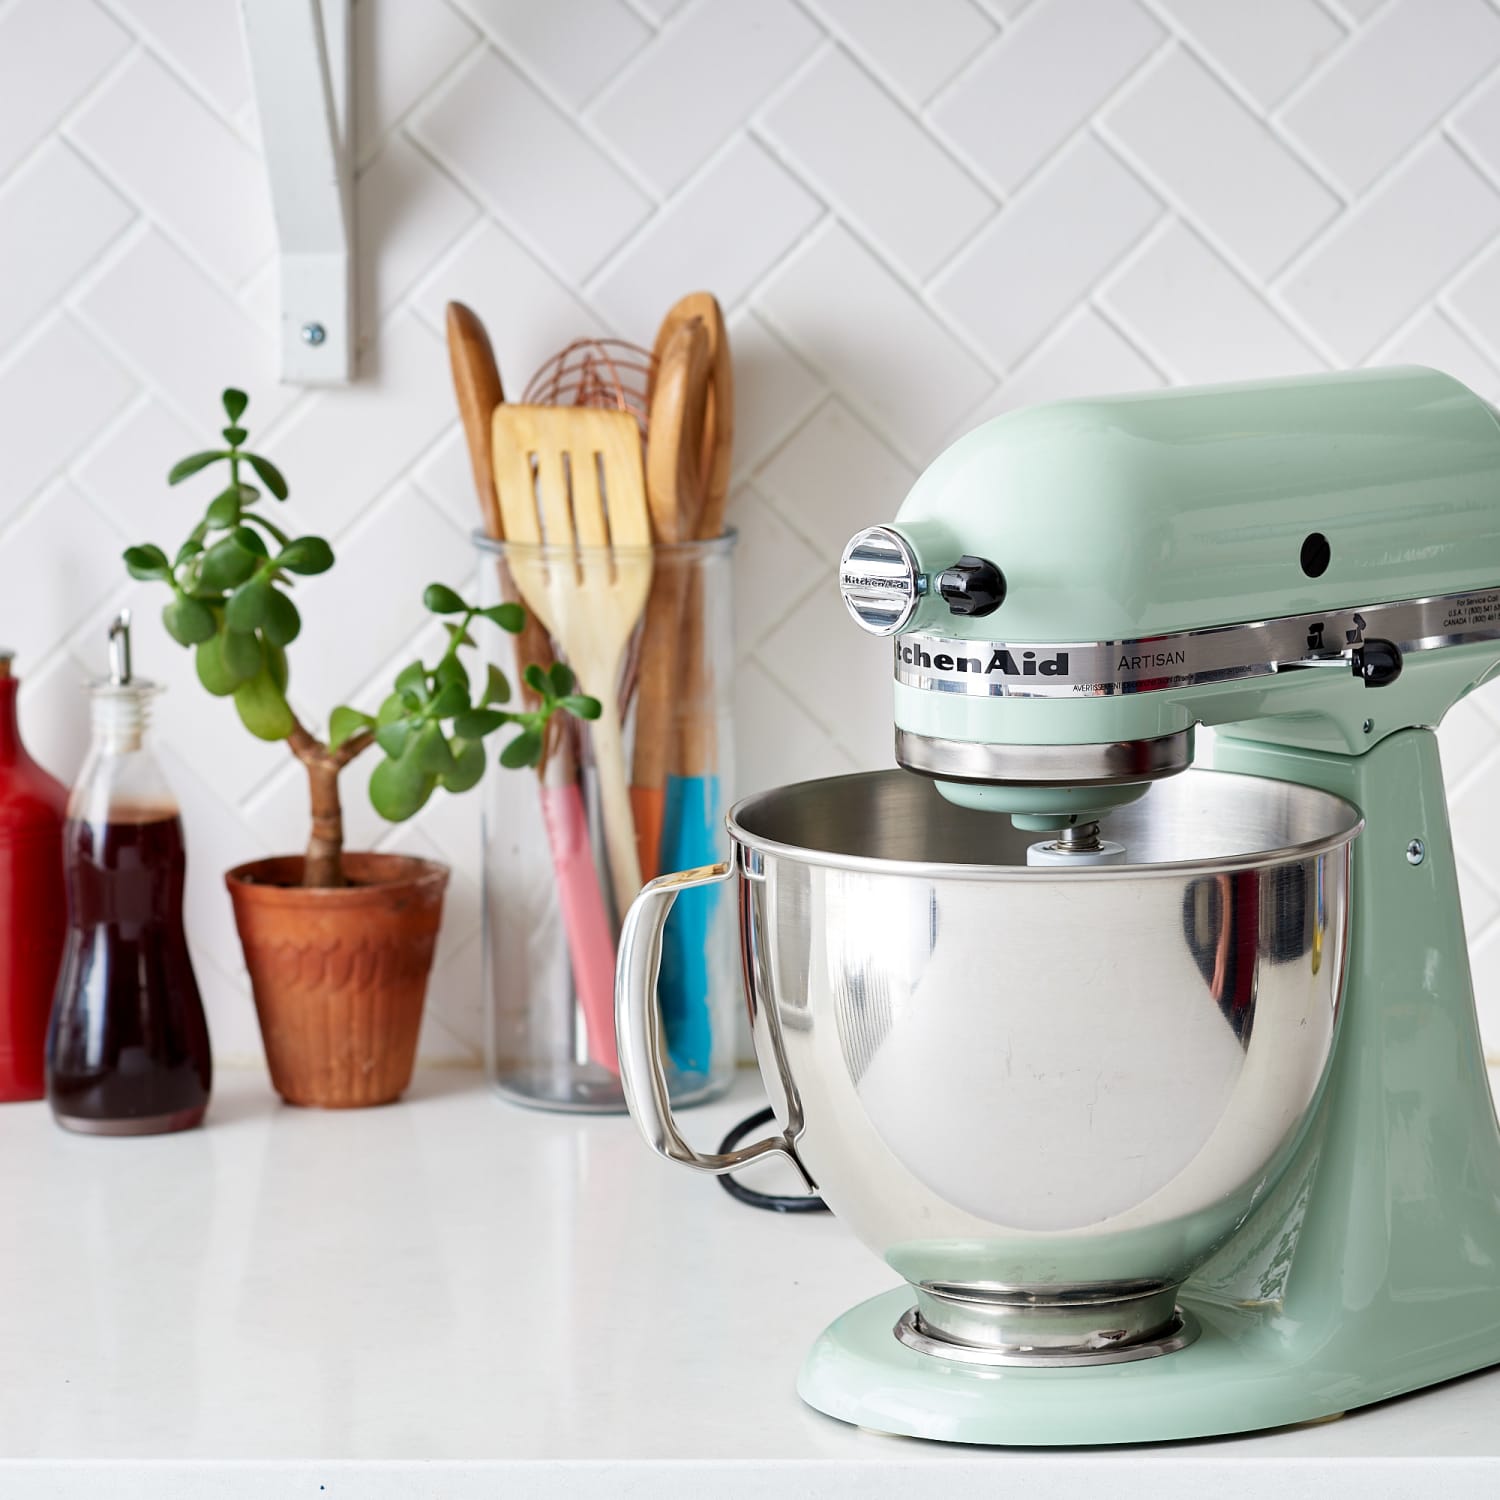 Fondsen Bekwaamheid plus This KitchenAid Sale Includes Stand Mixers, Blenders, and More | Kitchn